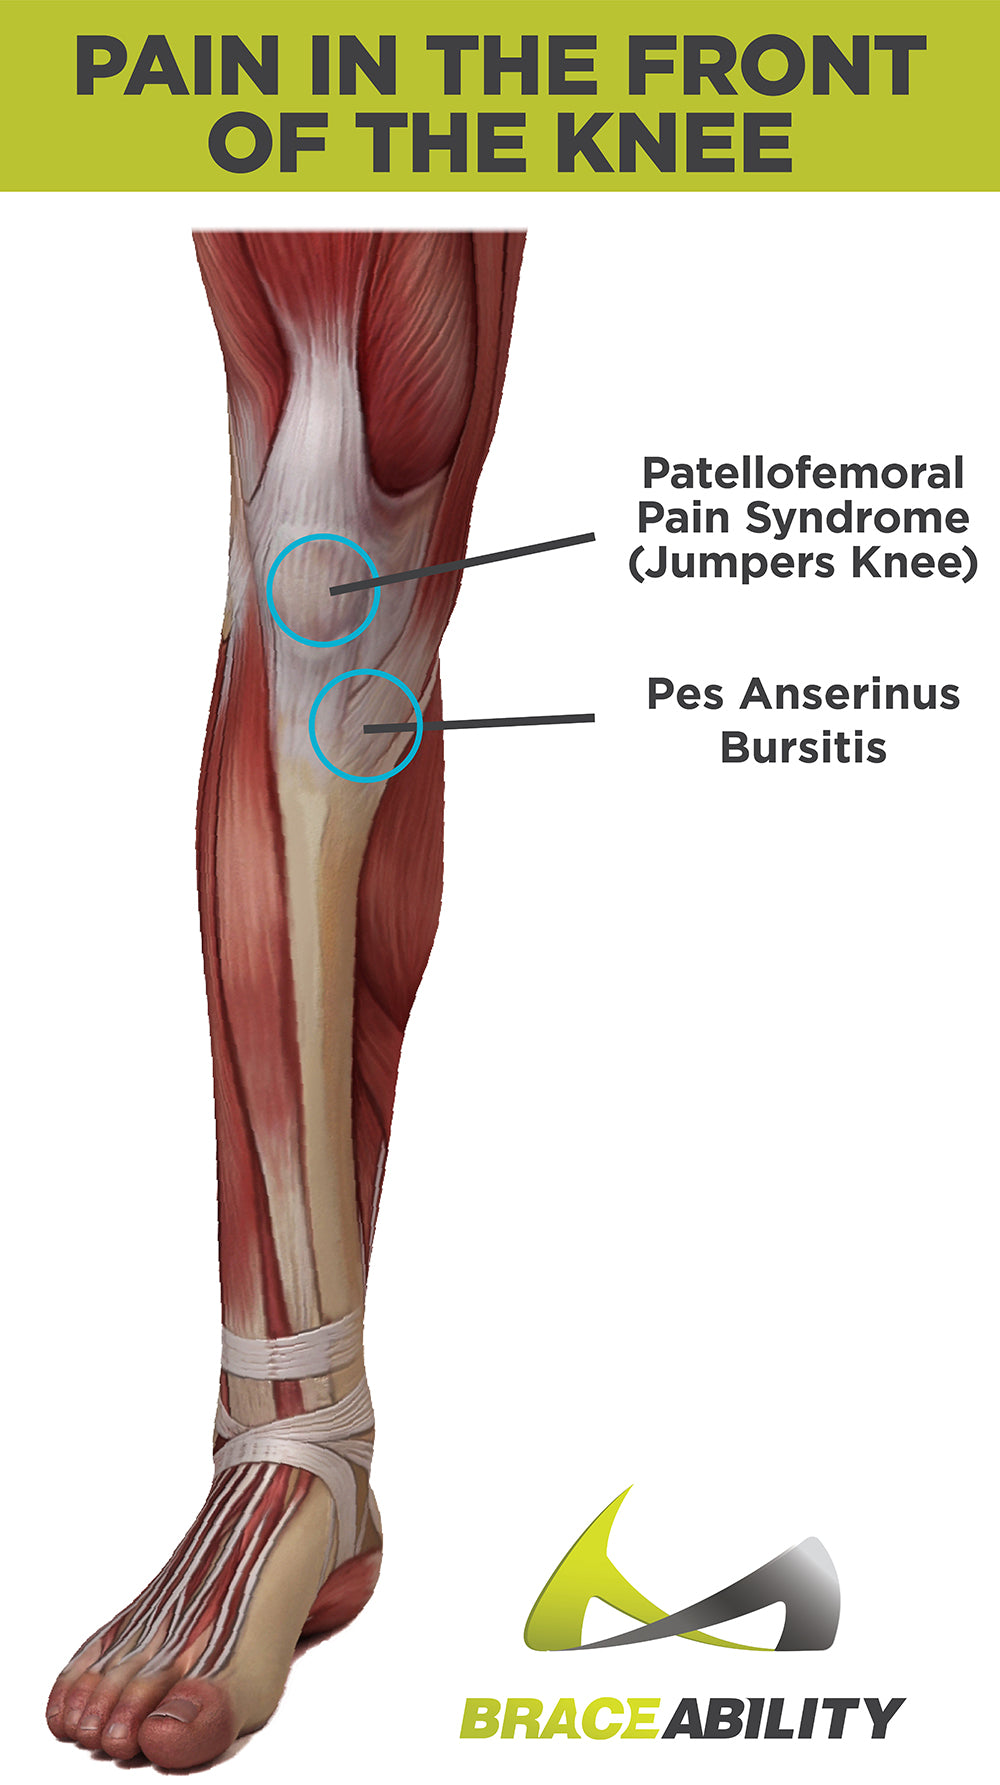 types of pain you feel in the front of your knee - patellofemoral pain syndrome, jumpers knee and pes anserinus bursitis